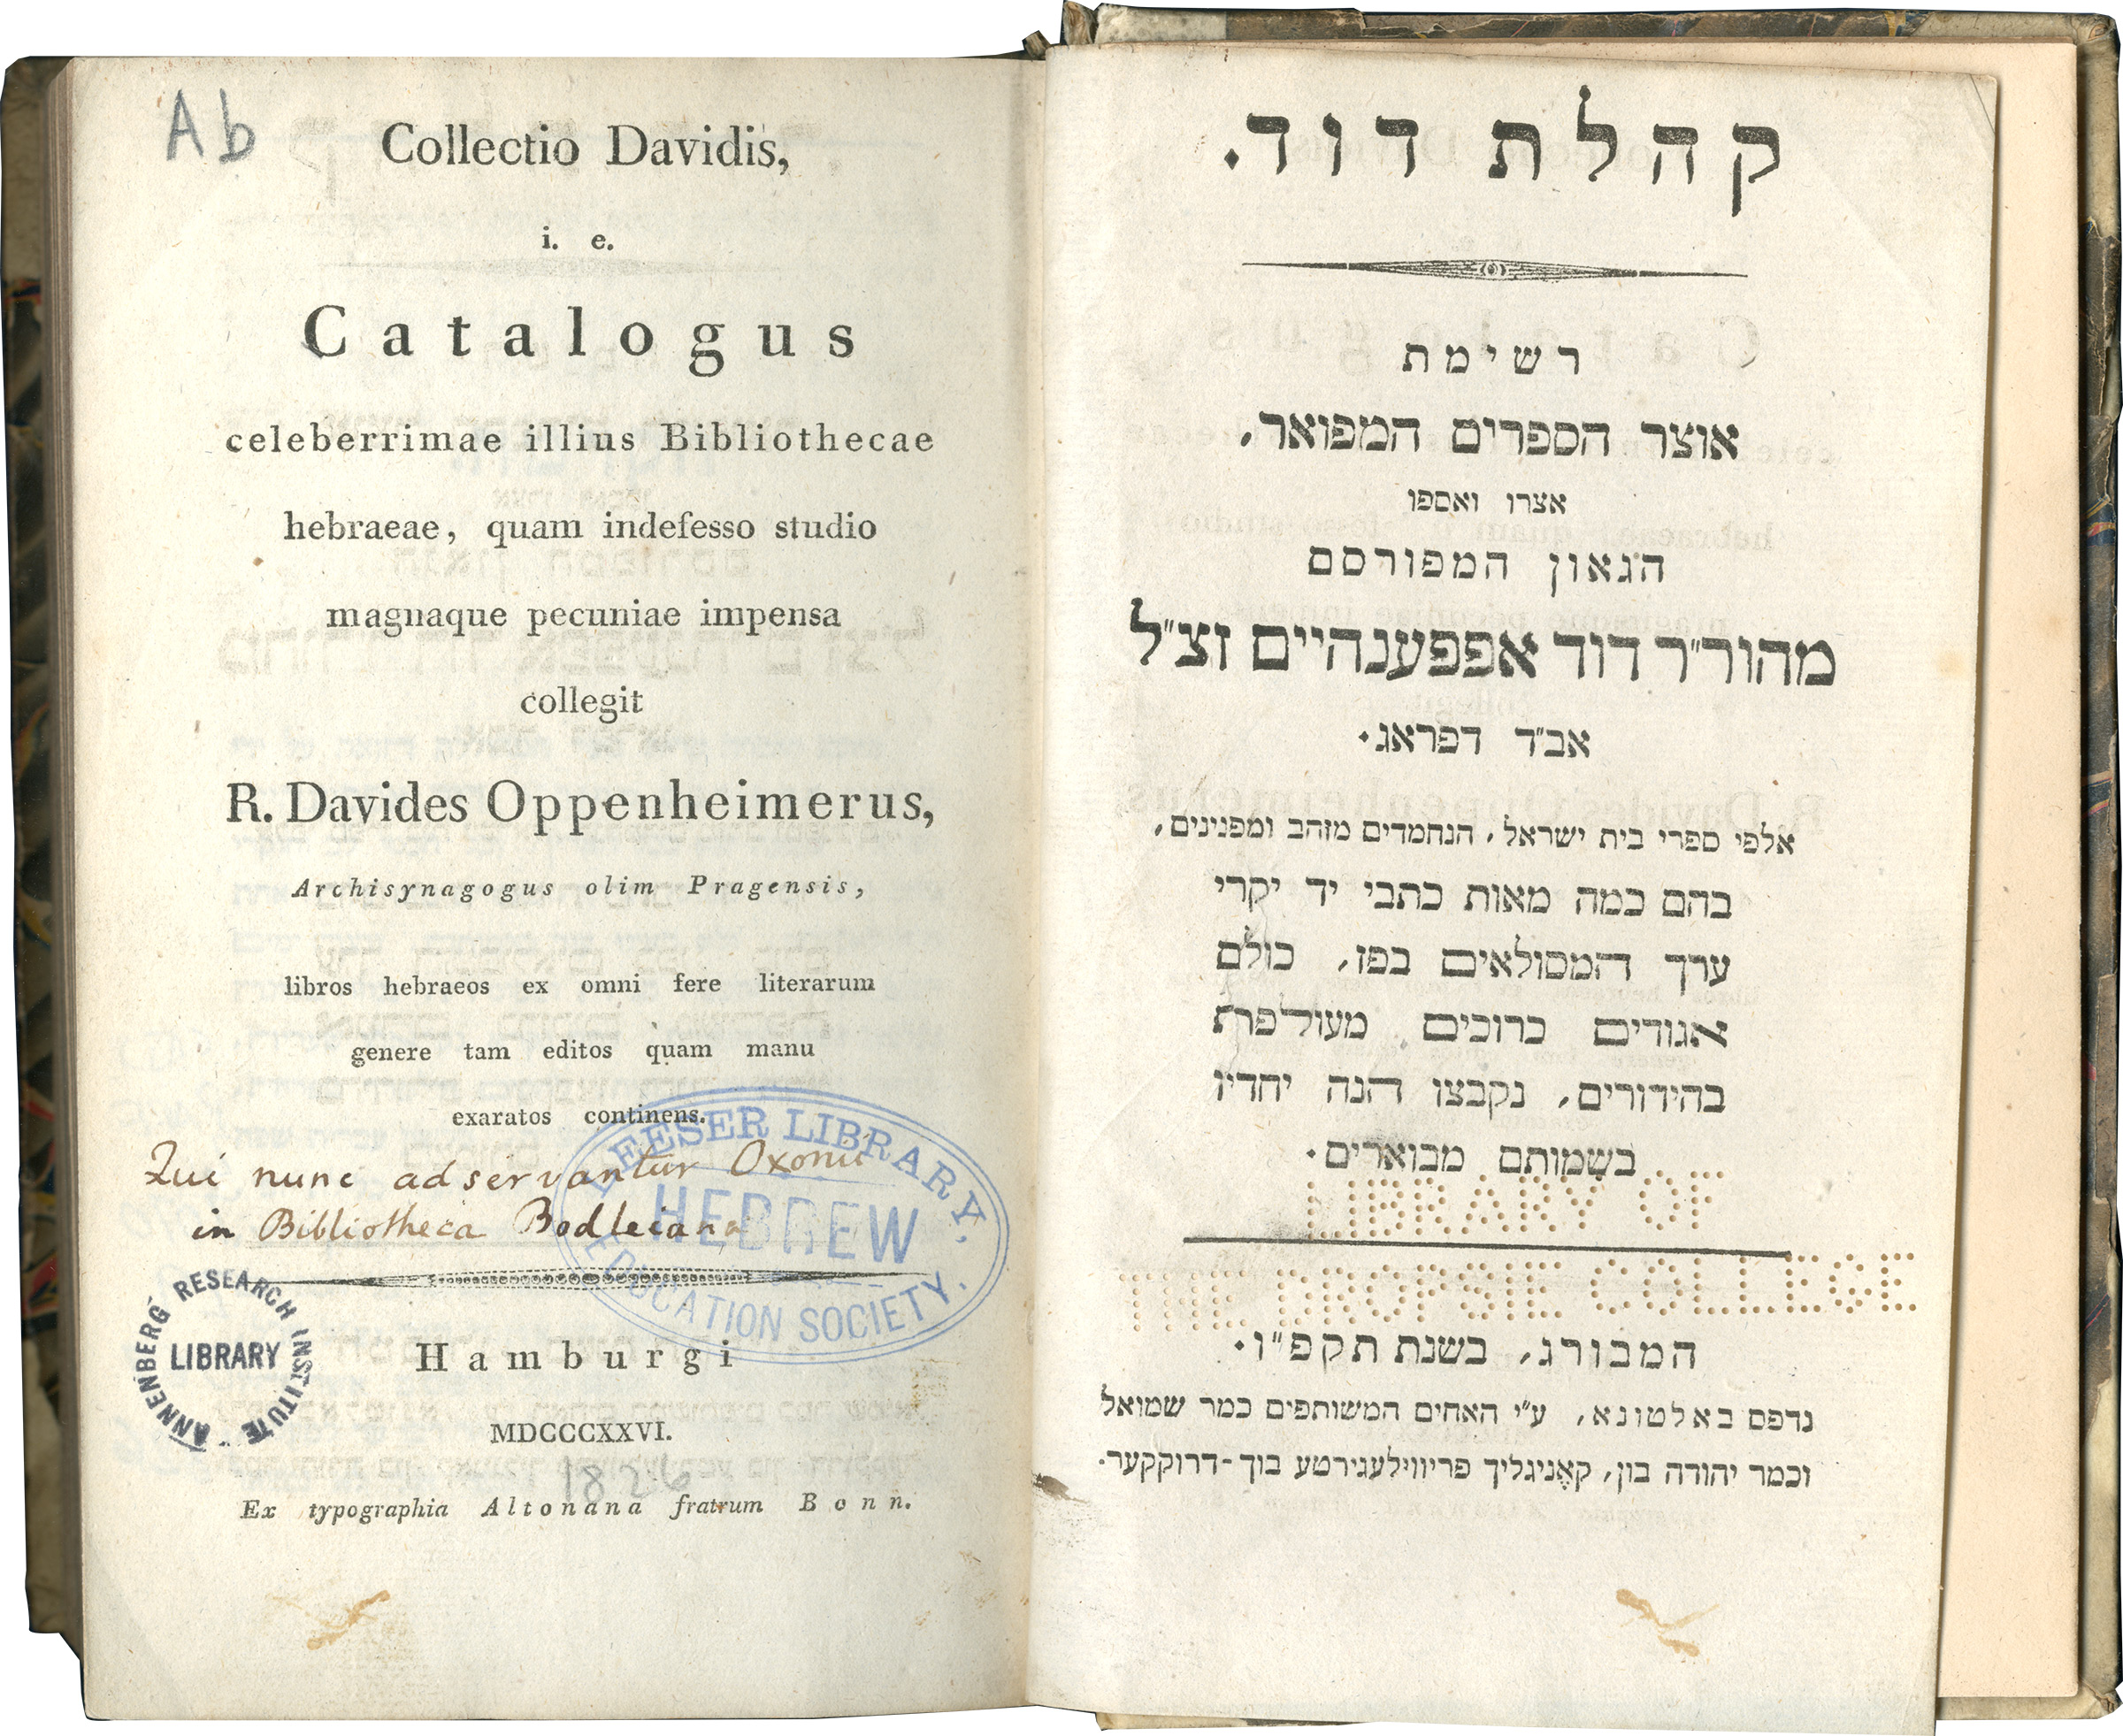 Collectio Davidis, facing title pages  in Latin and Hebrew